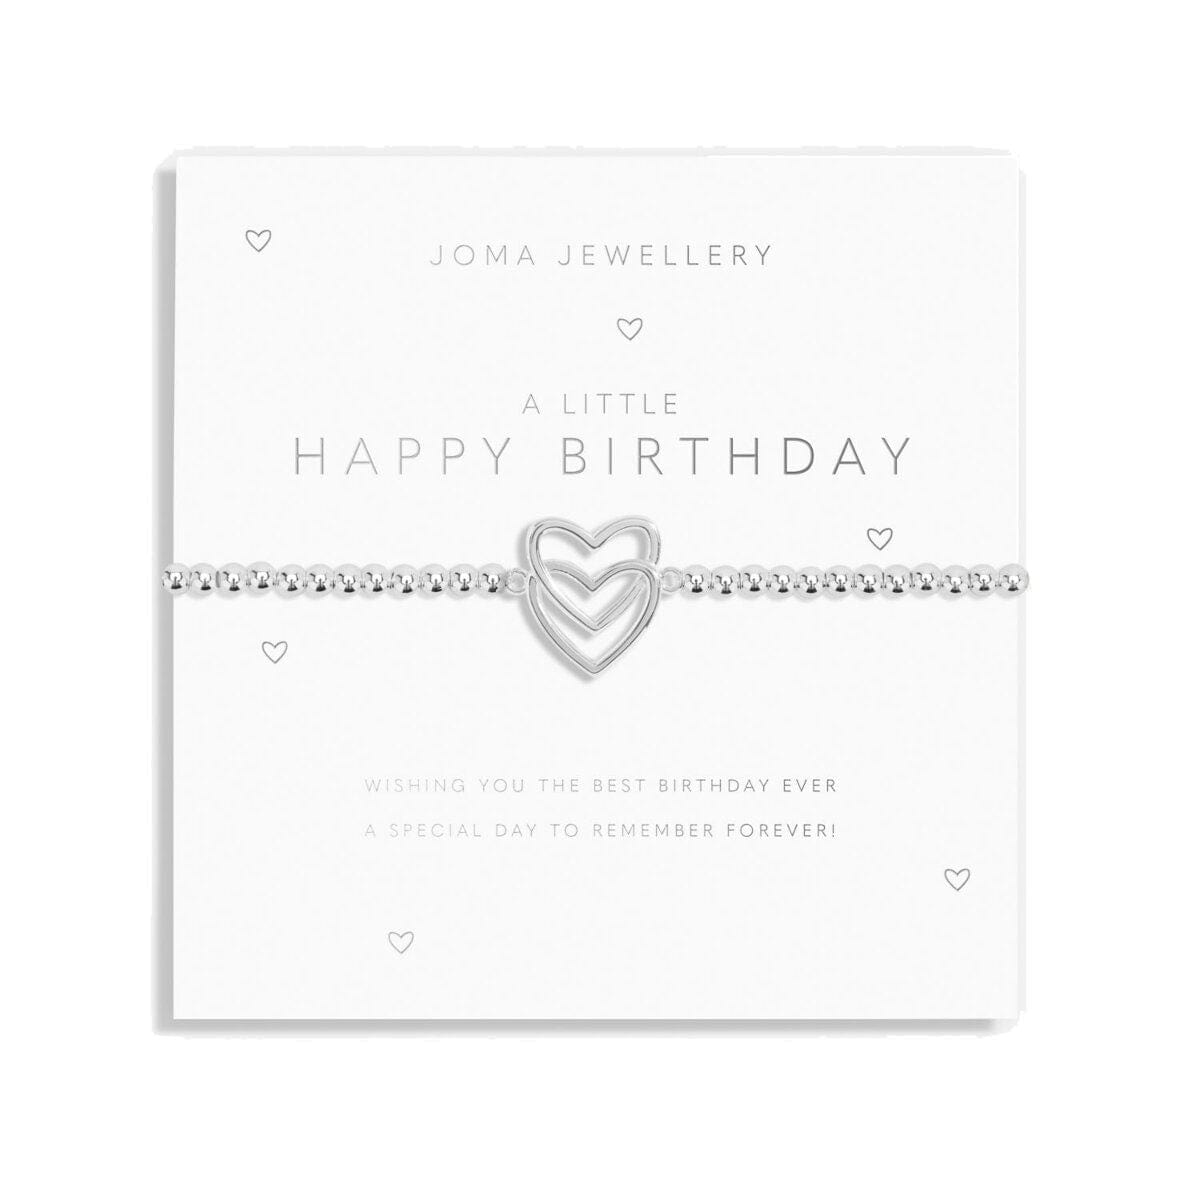 Joma Jewellery Bracelet Joma Jewellery Bracelet - A Little Happy Birthday (Linked Hearts)